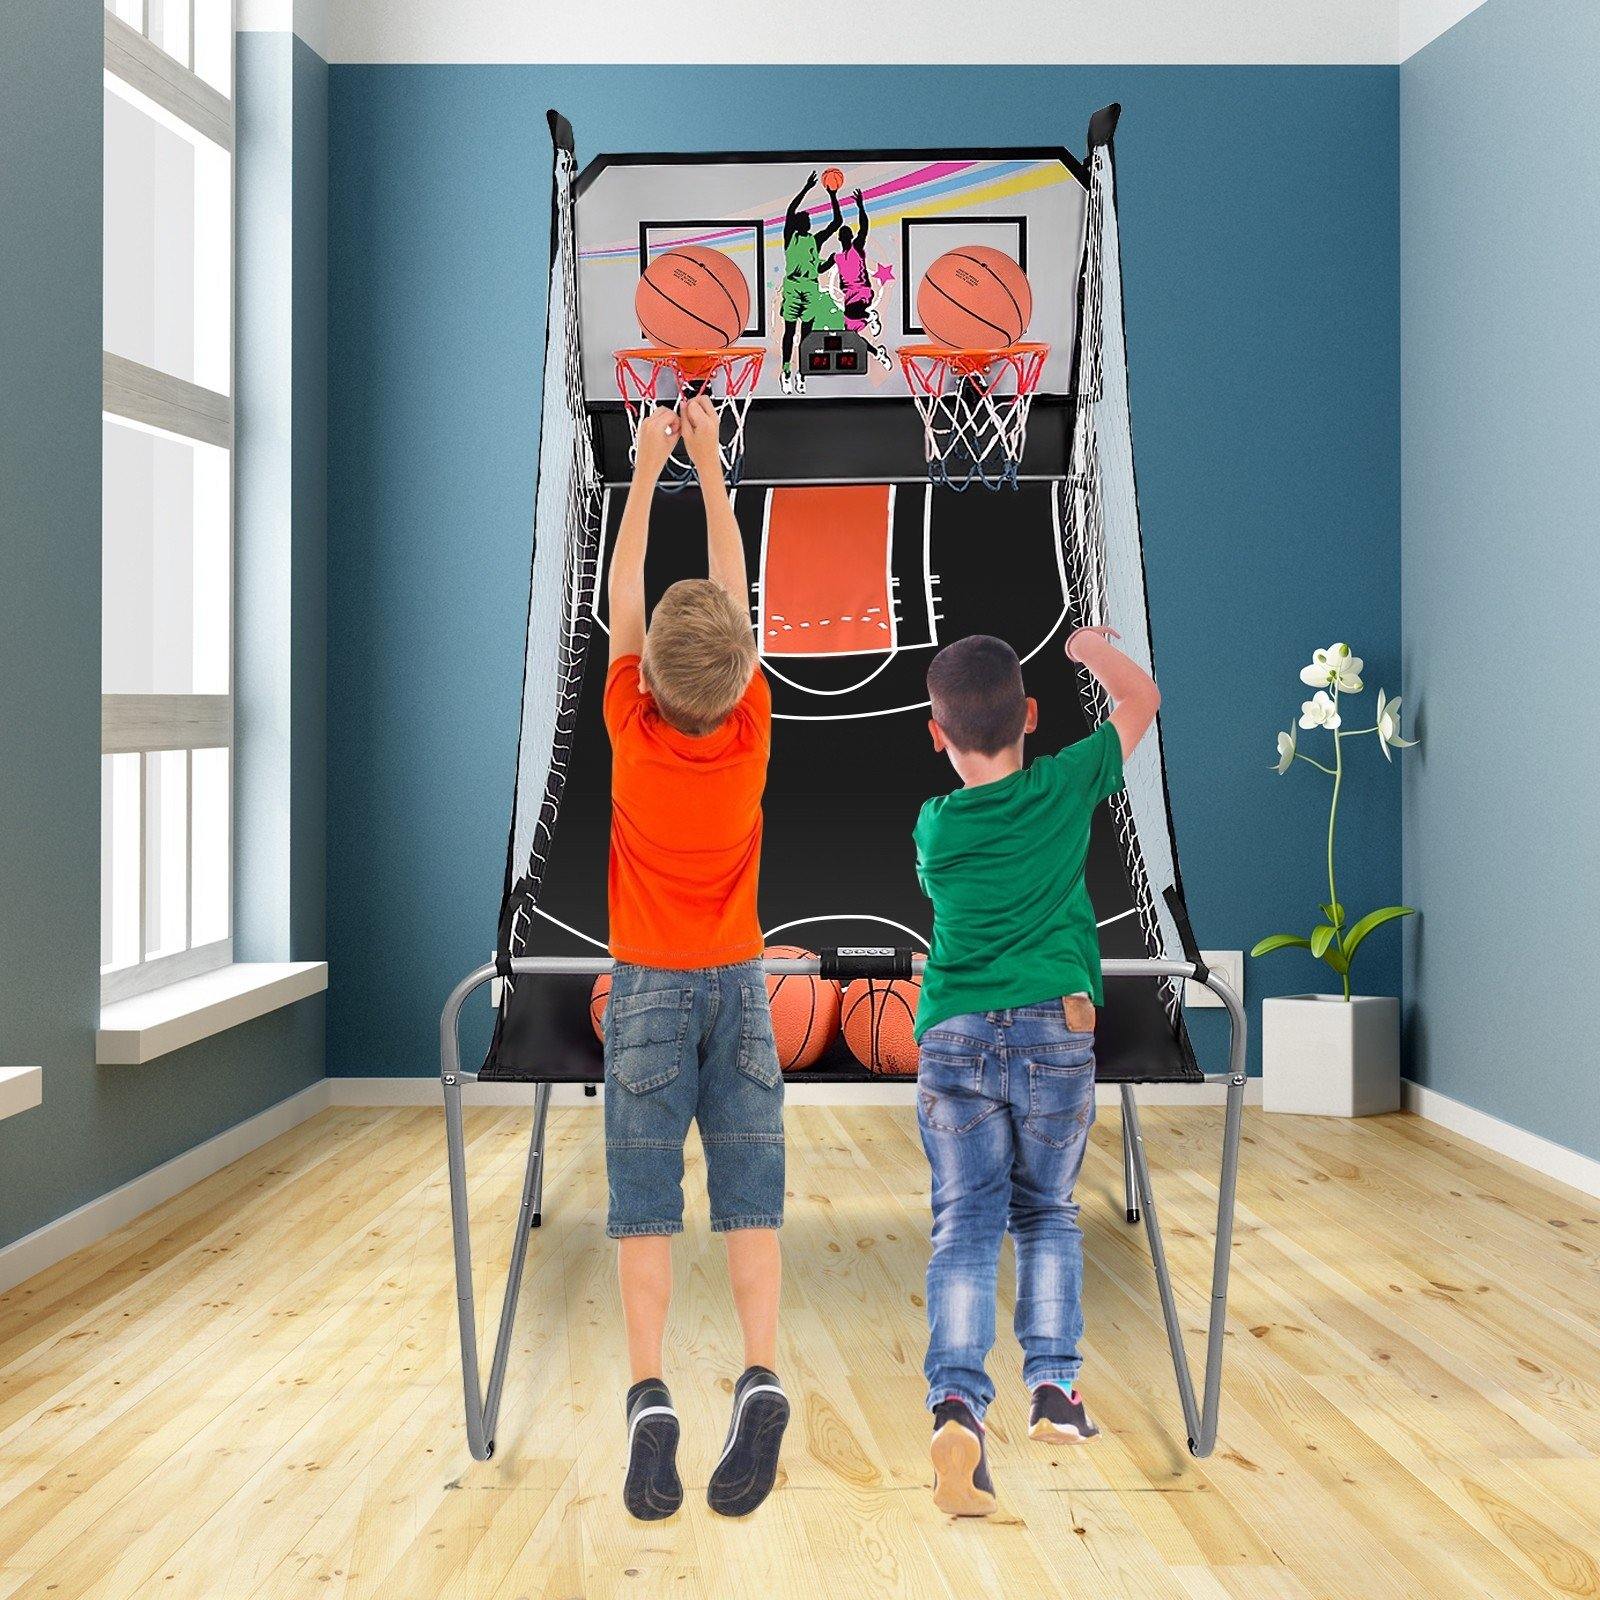 Foldable Basketball Arcade Game, 8 Game Options, Electronic Double Shot 2 Player w/ 4 Balls and LED Scoring System - Giantexus